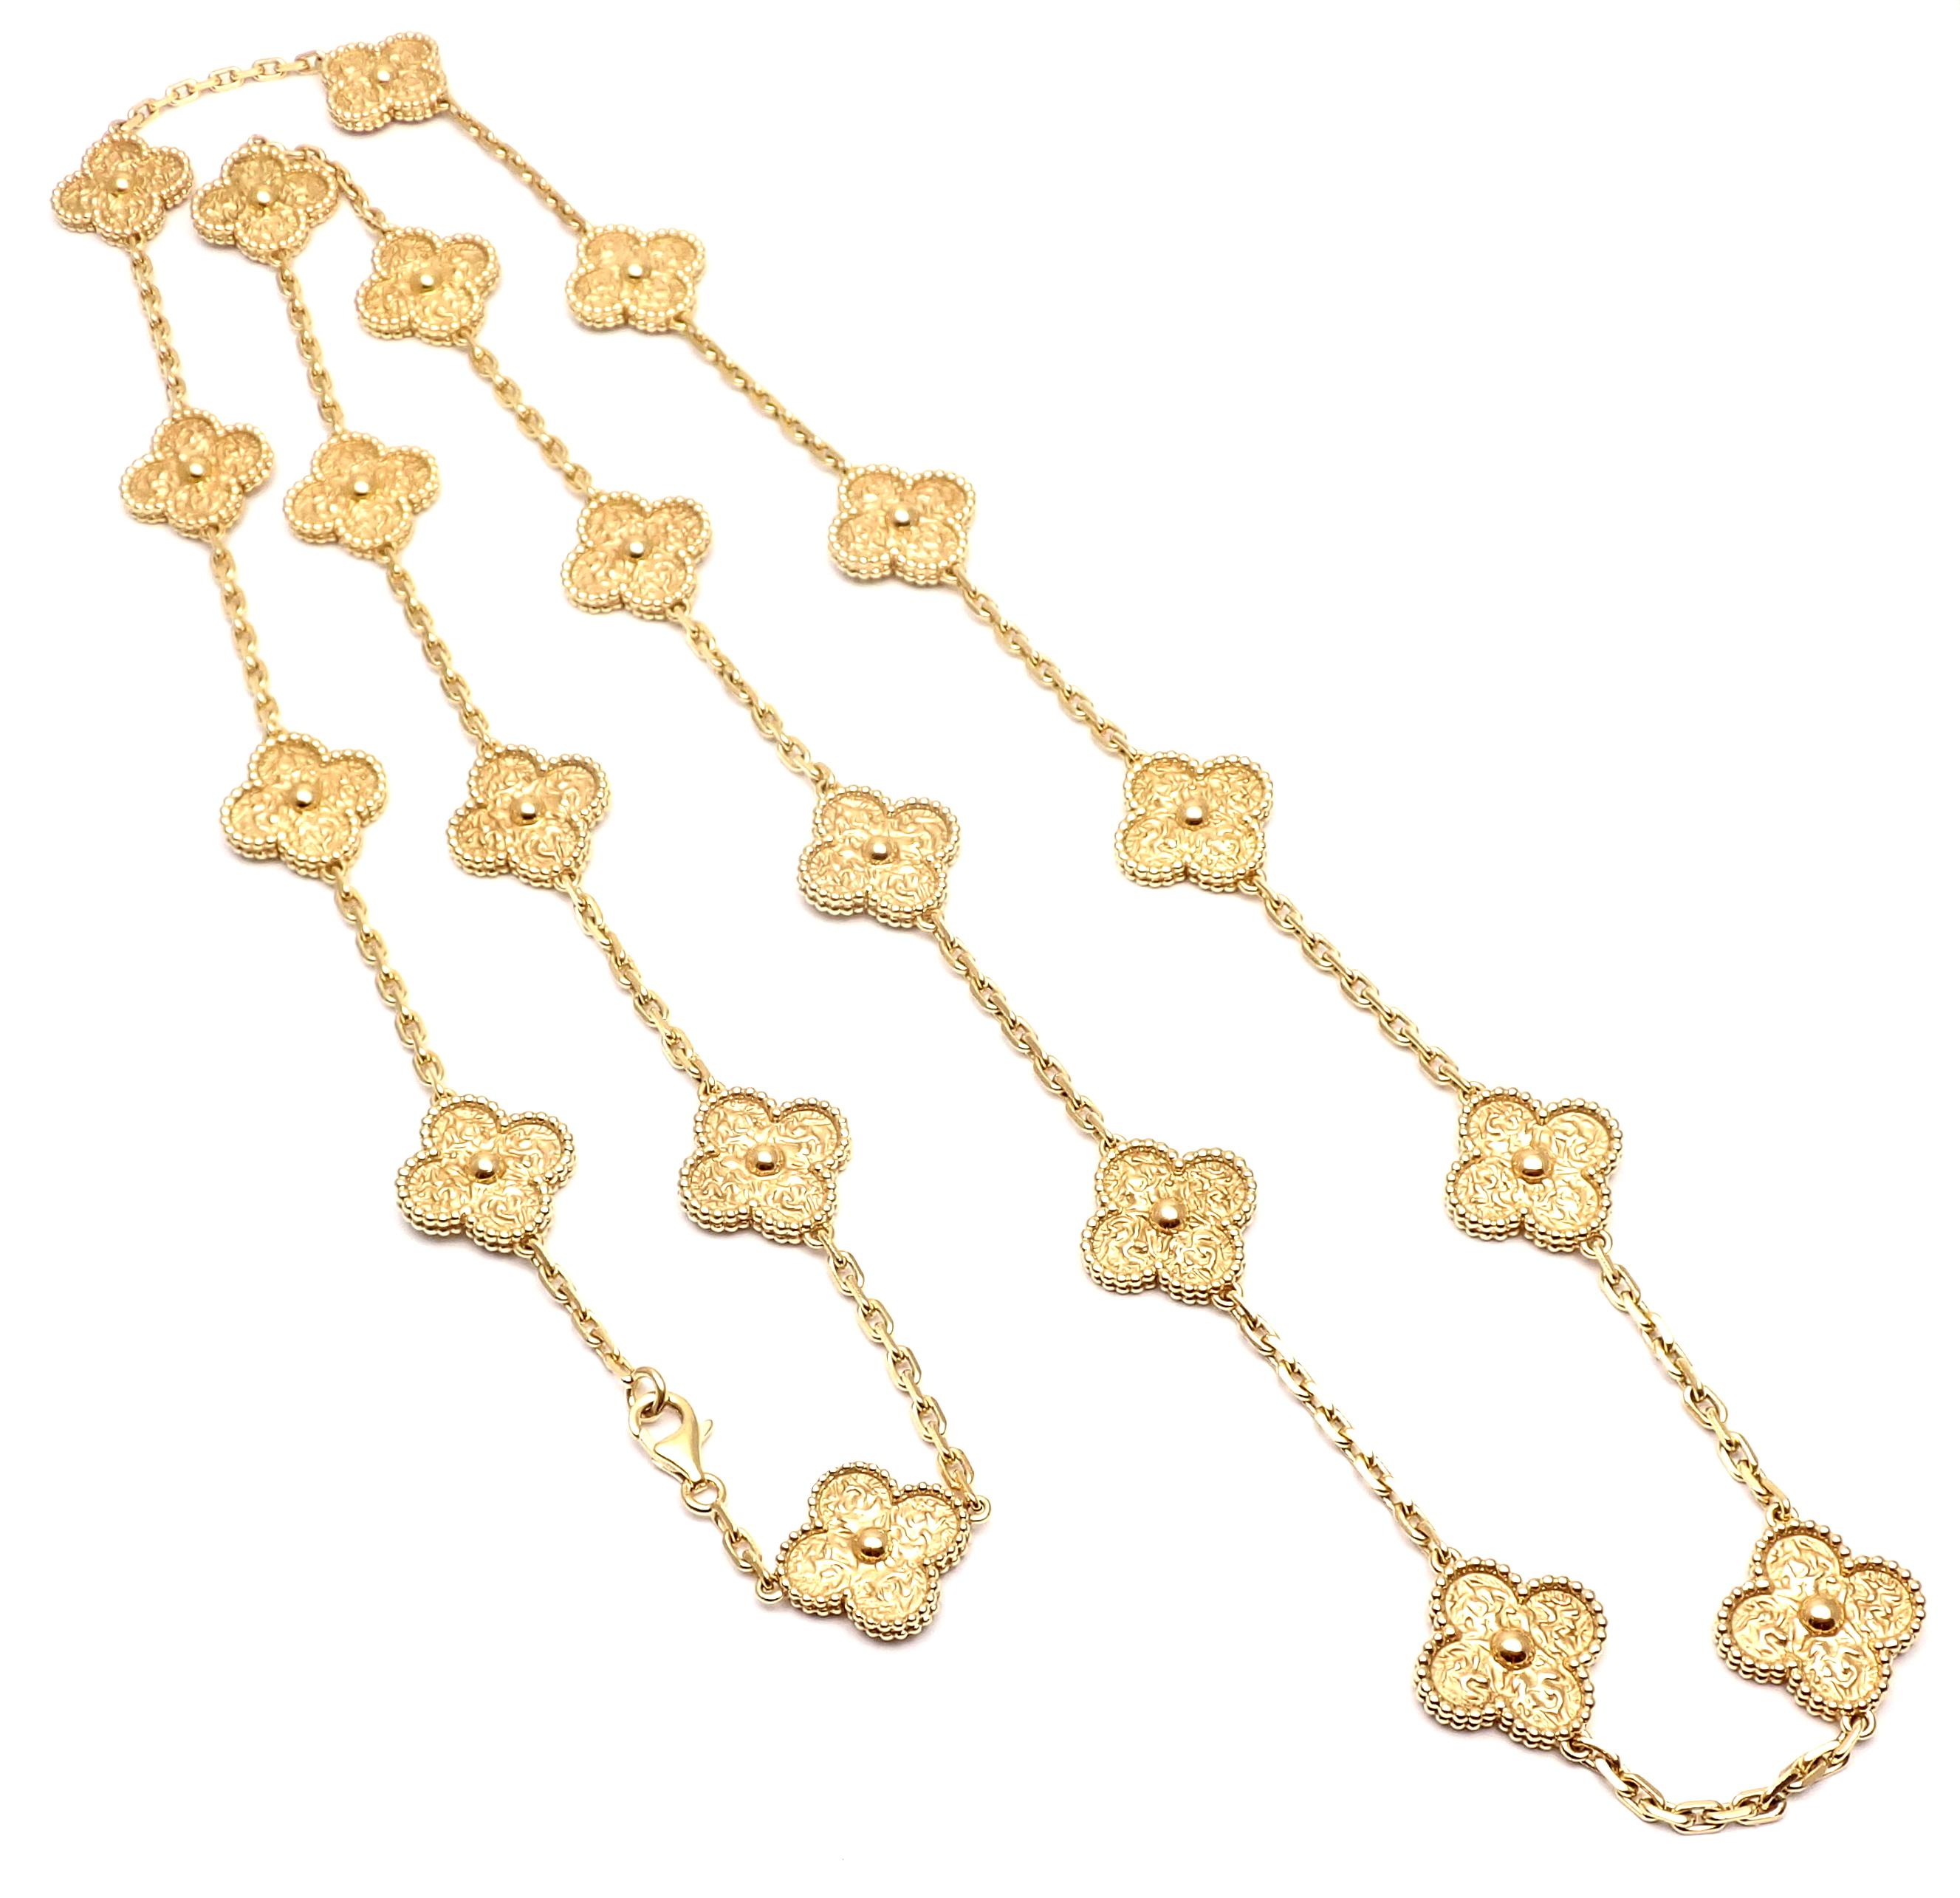 18k Yellow Gold Alhambra 20 Motif Necklace by Van Cleef & Arpels. 
With 20 motifs of 18k yellow gold alhambras 15mm each.
This necklace comes with certificate of authenticity from Van Cleef & Arpels.
Details: 
Length: 34